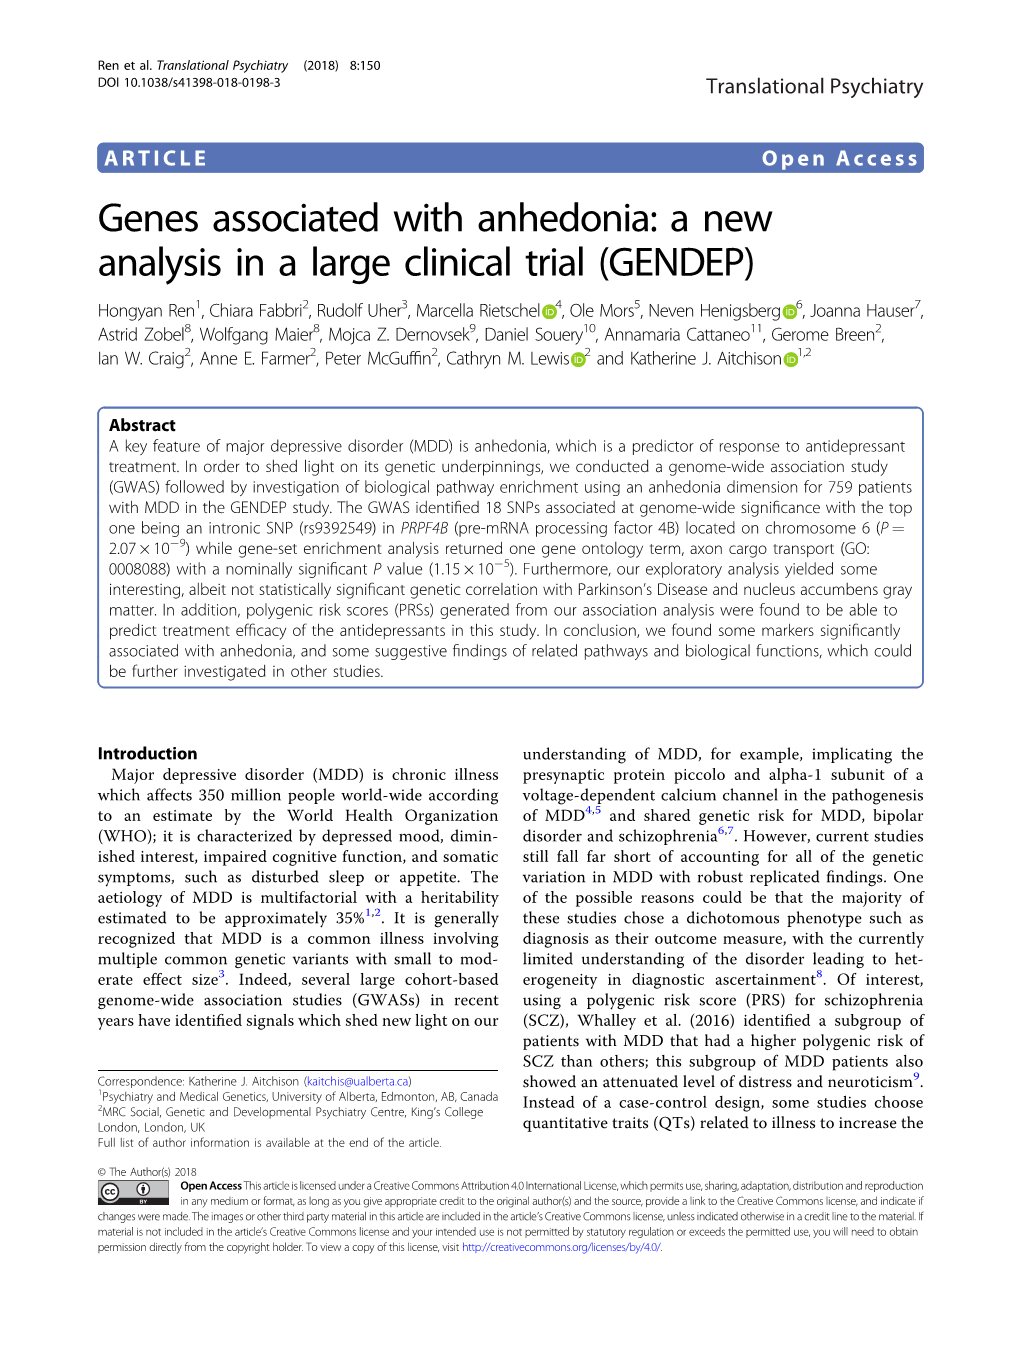 Genes Associated with Anhedonia